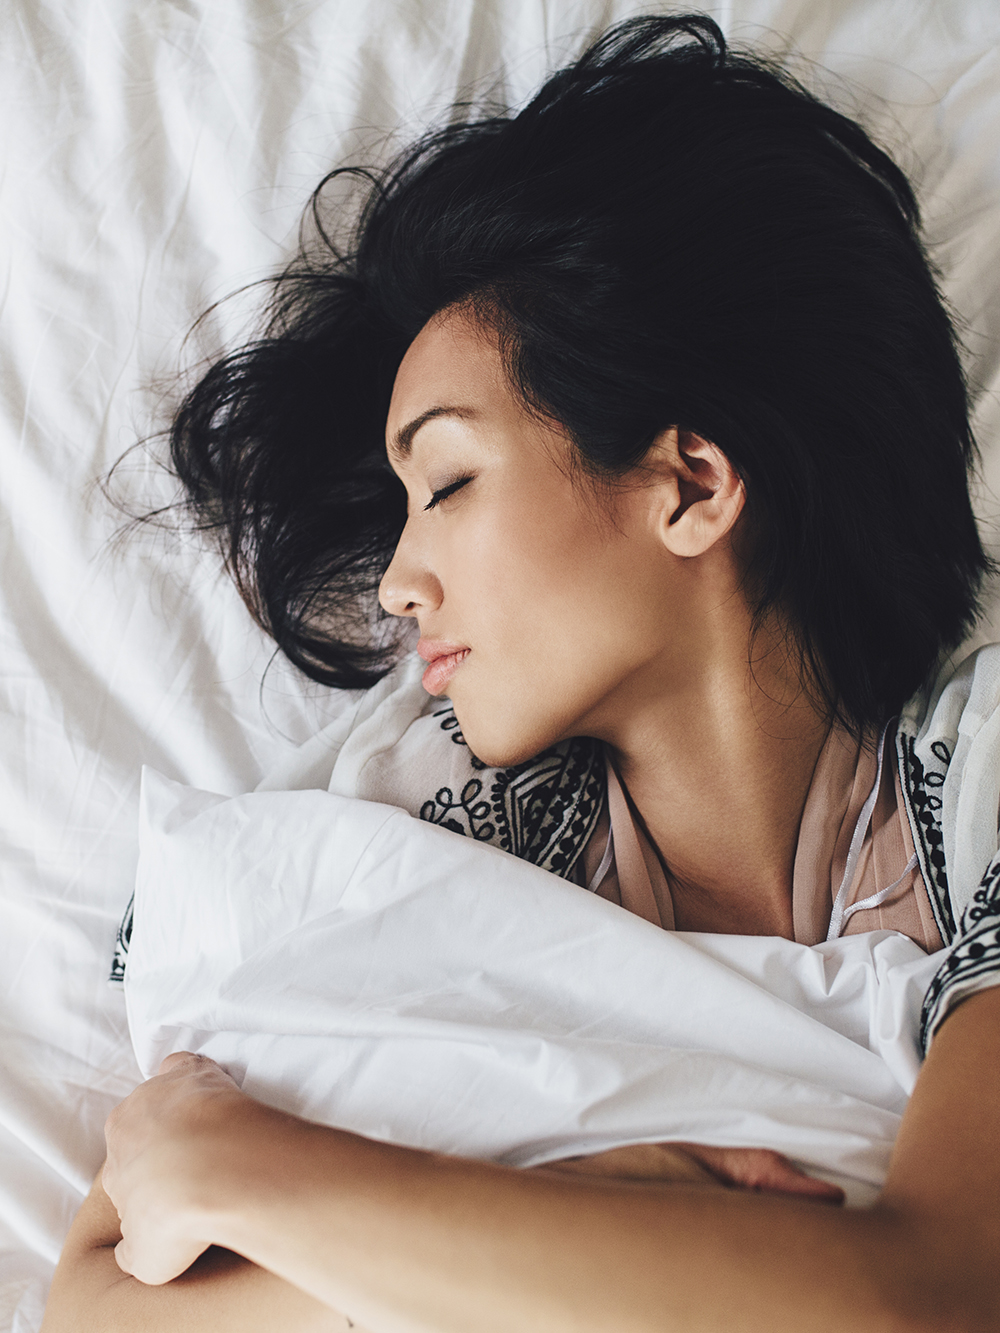 20 Products for Sleep That Actually Work